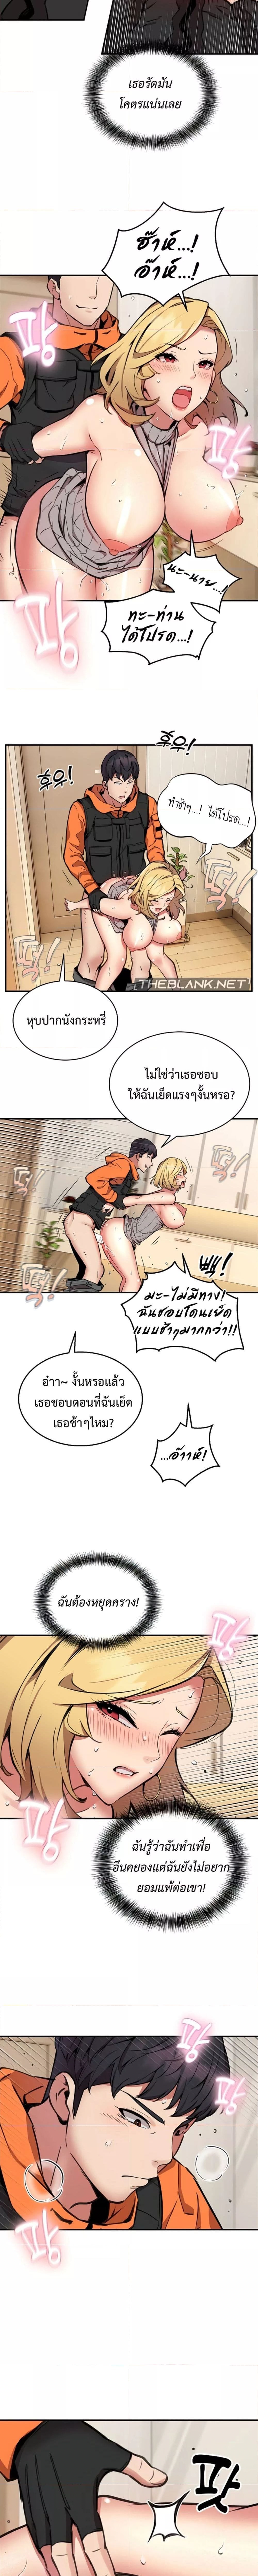 Driver in the New City ตอนที่ 9 ภาพ 10